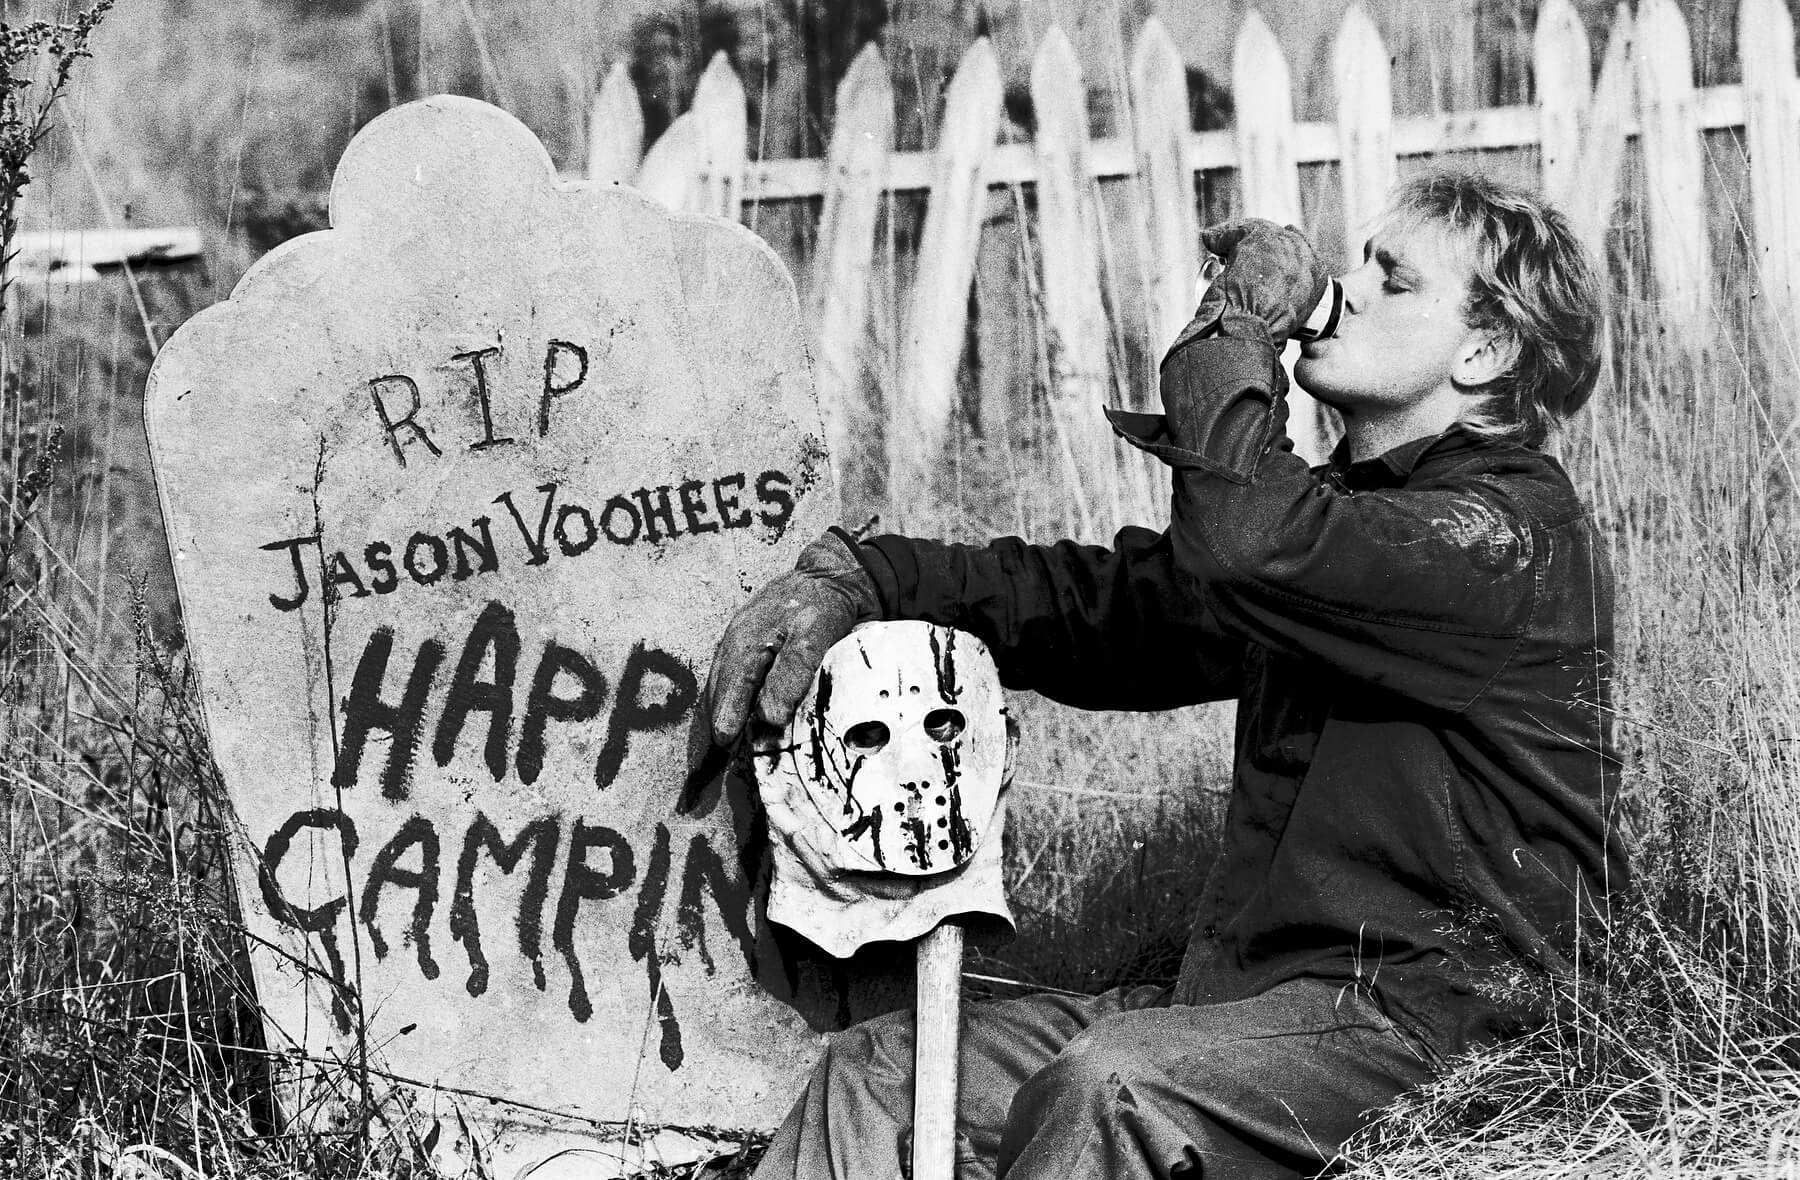 A halloween haunt performer dressed as Jason Voorhees takes a break, drinking a soda while sitting among tombstones.